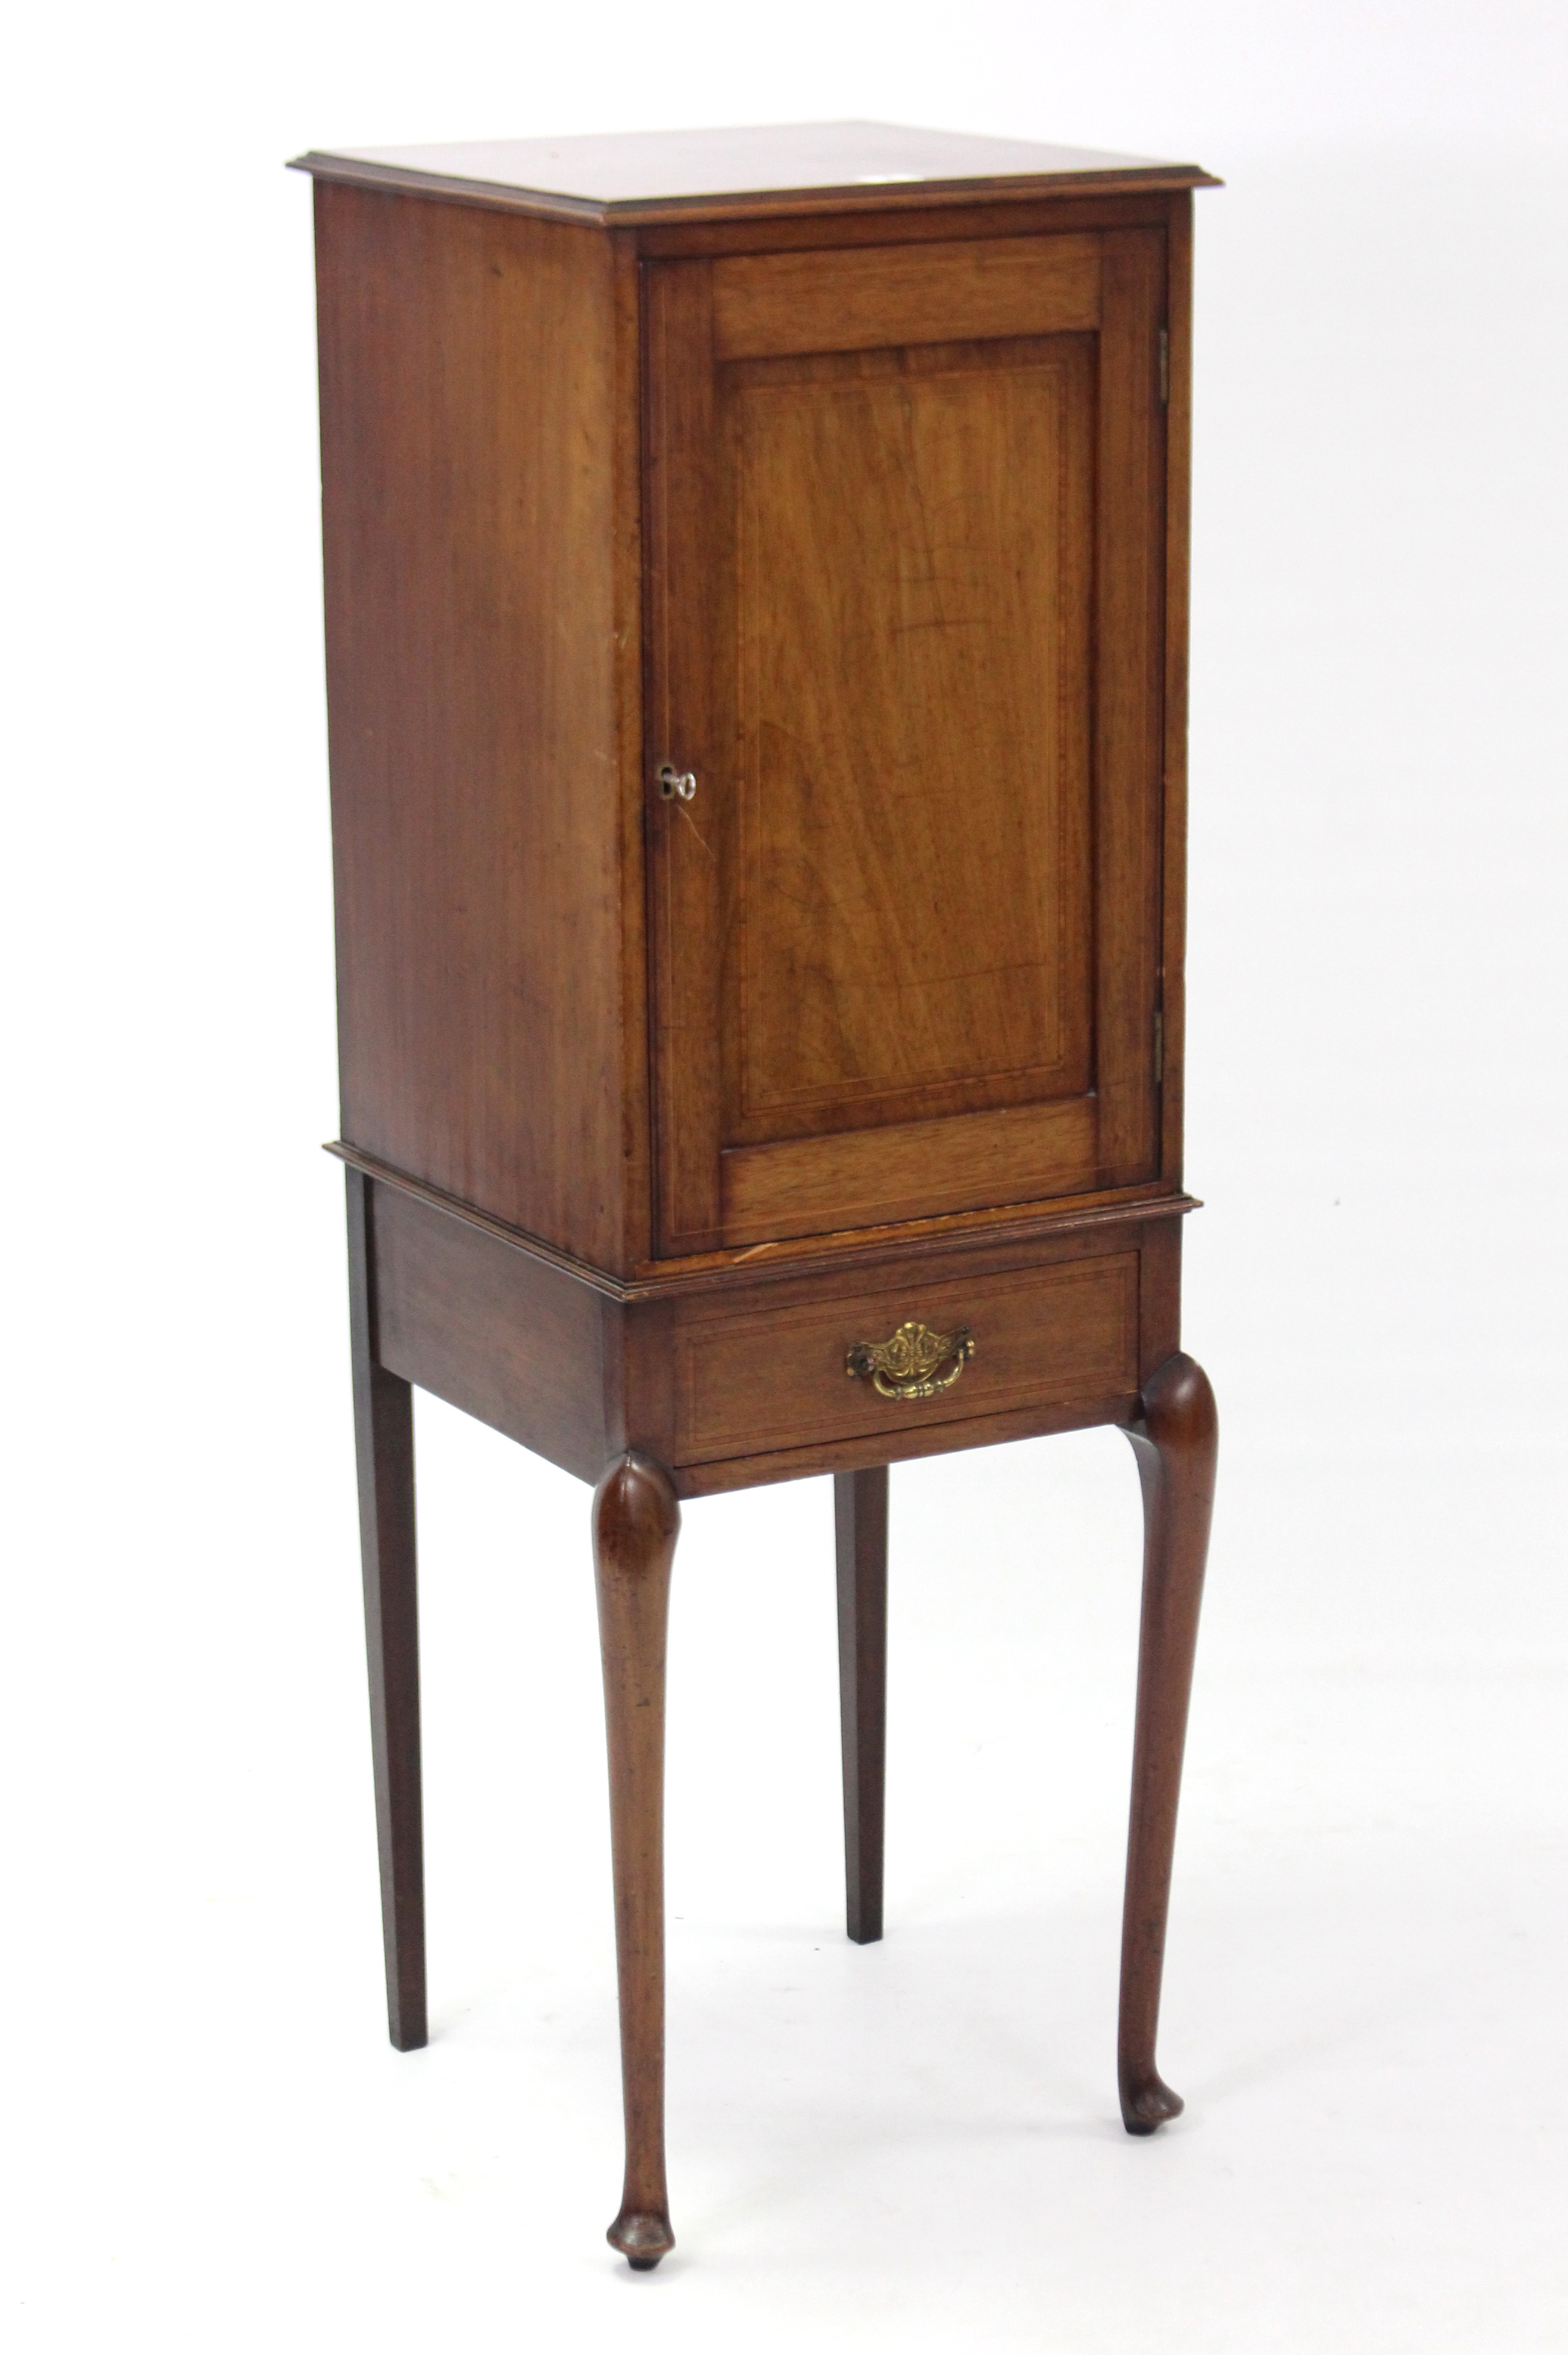 An Edwardian inlaid-mahogany small upright cabinet with fitted interior enclosed by panel door above